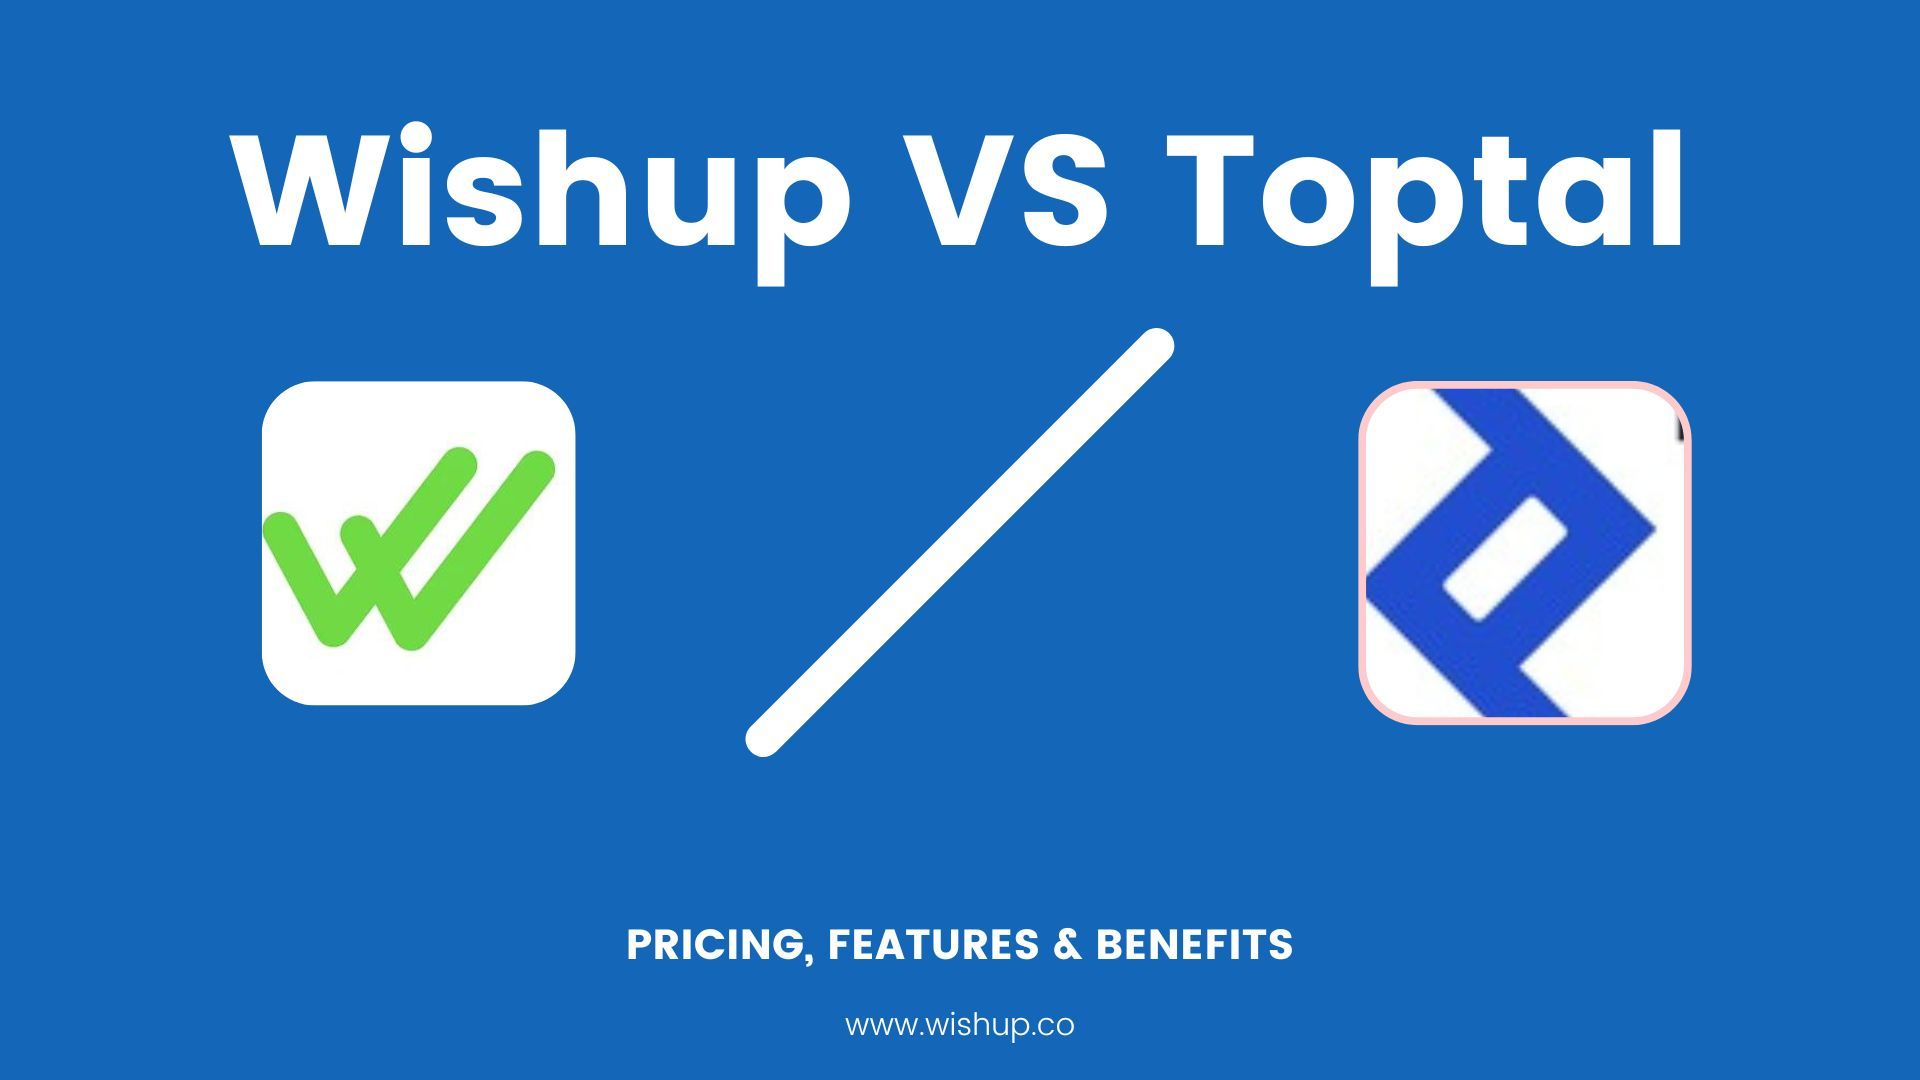 Wishup a better virtual assistance provider than Toptal